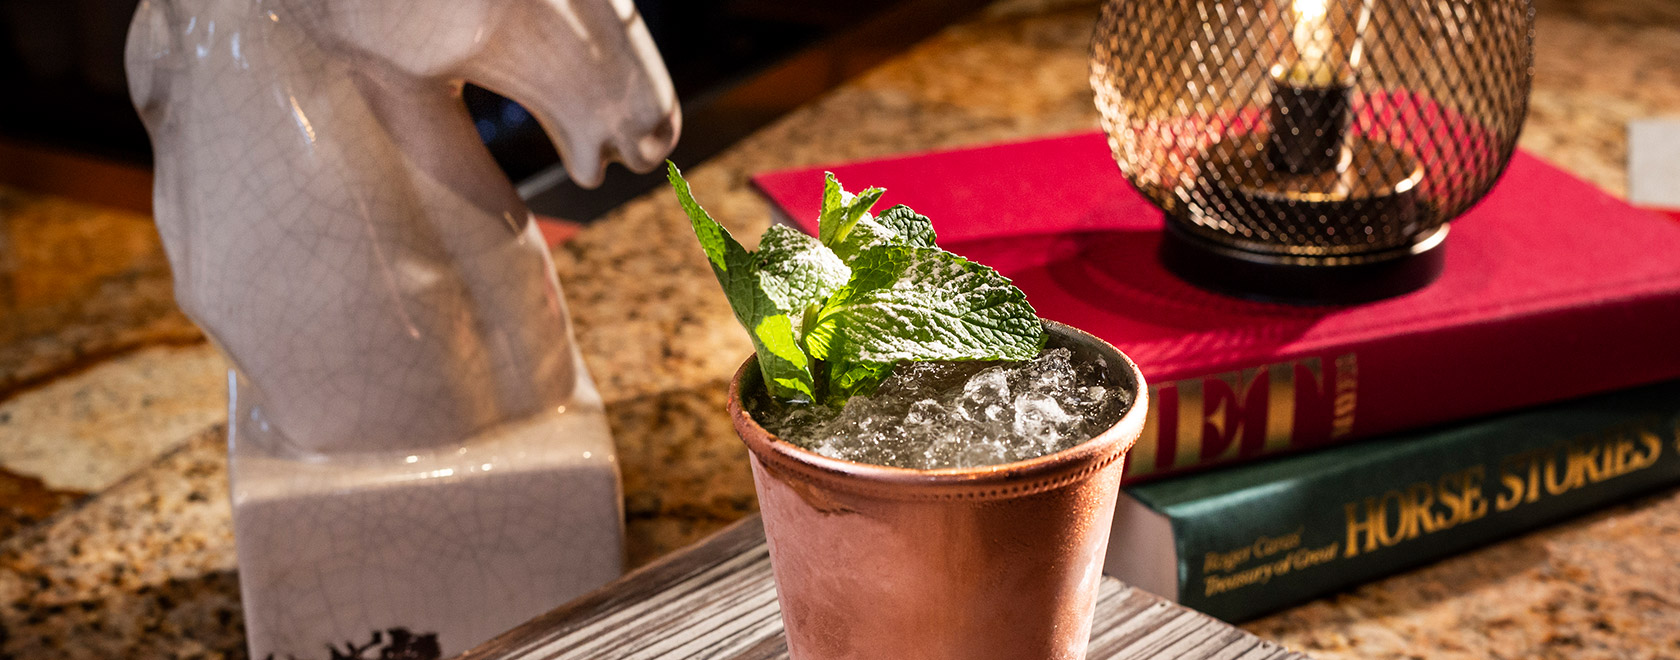 Icy mint julep in frosty copper cup with mint sprig garnish